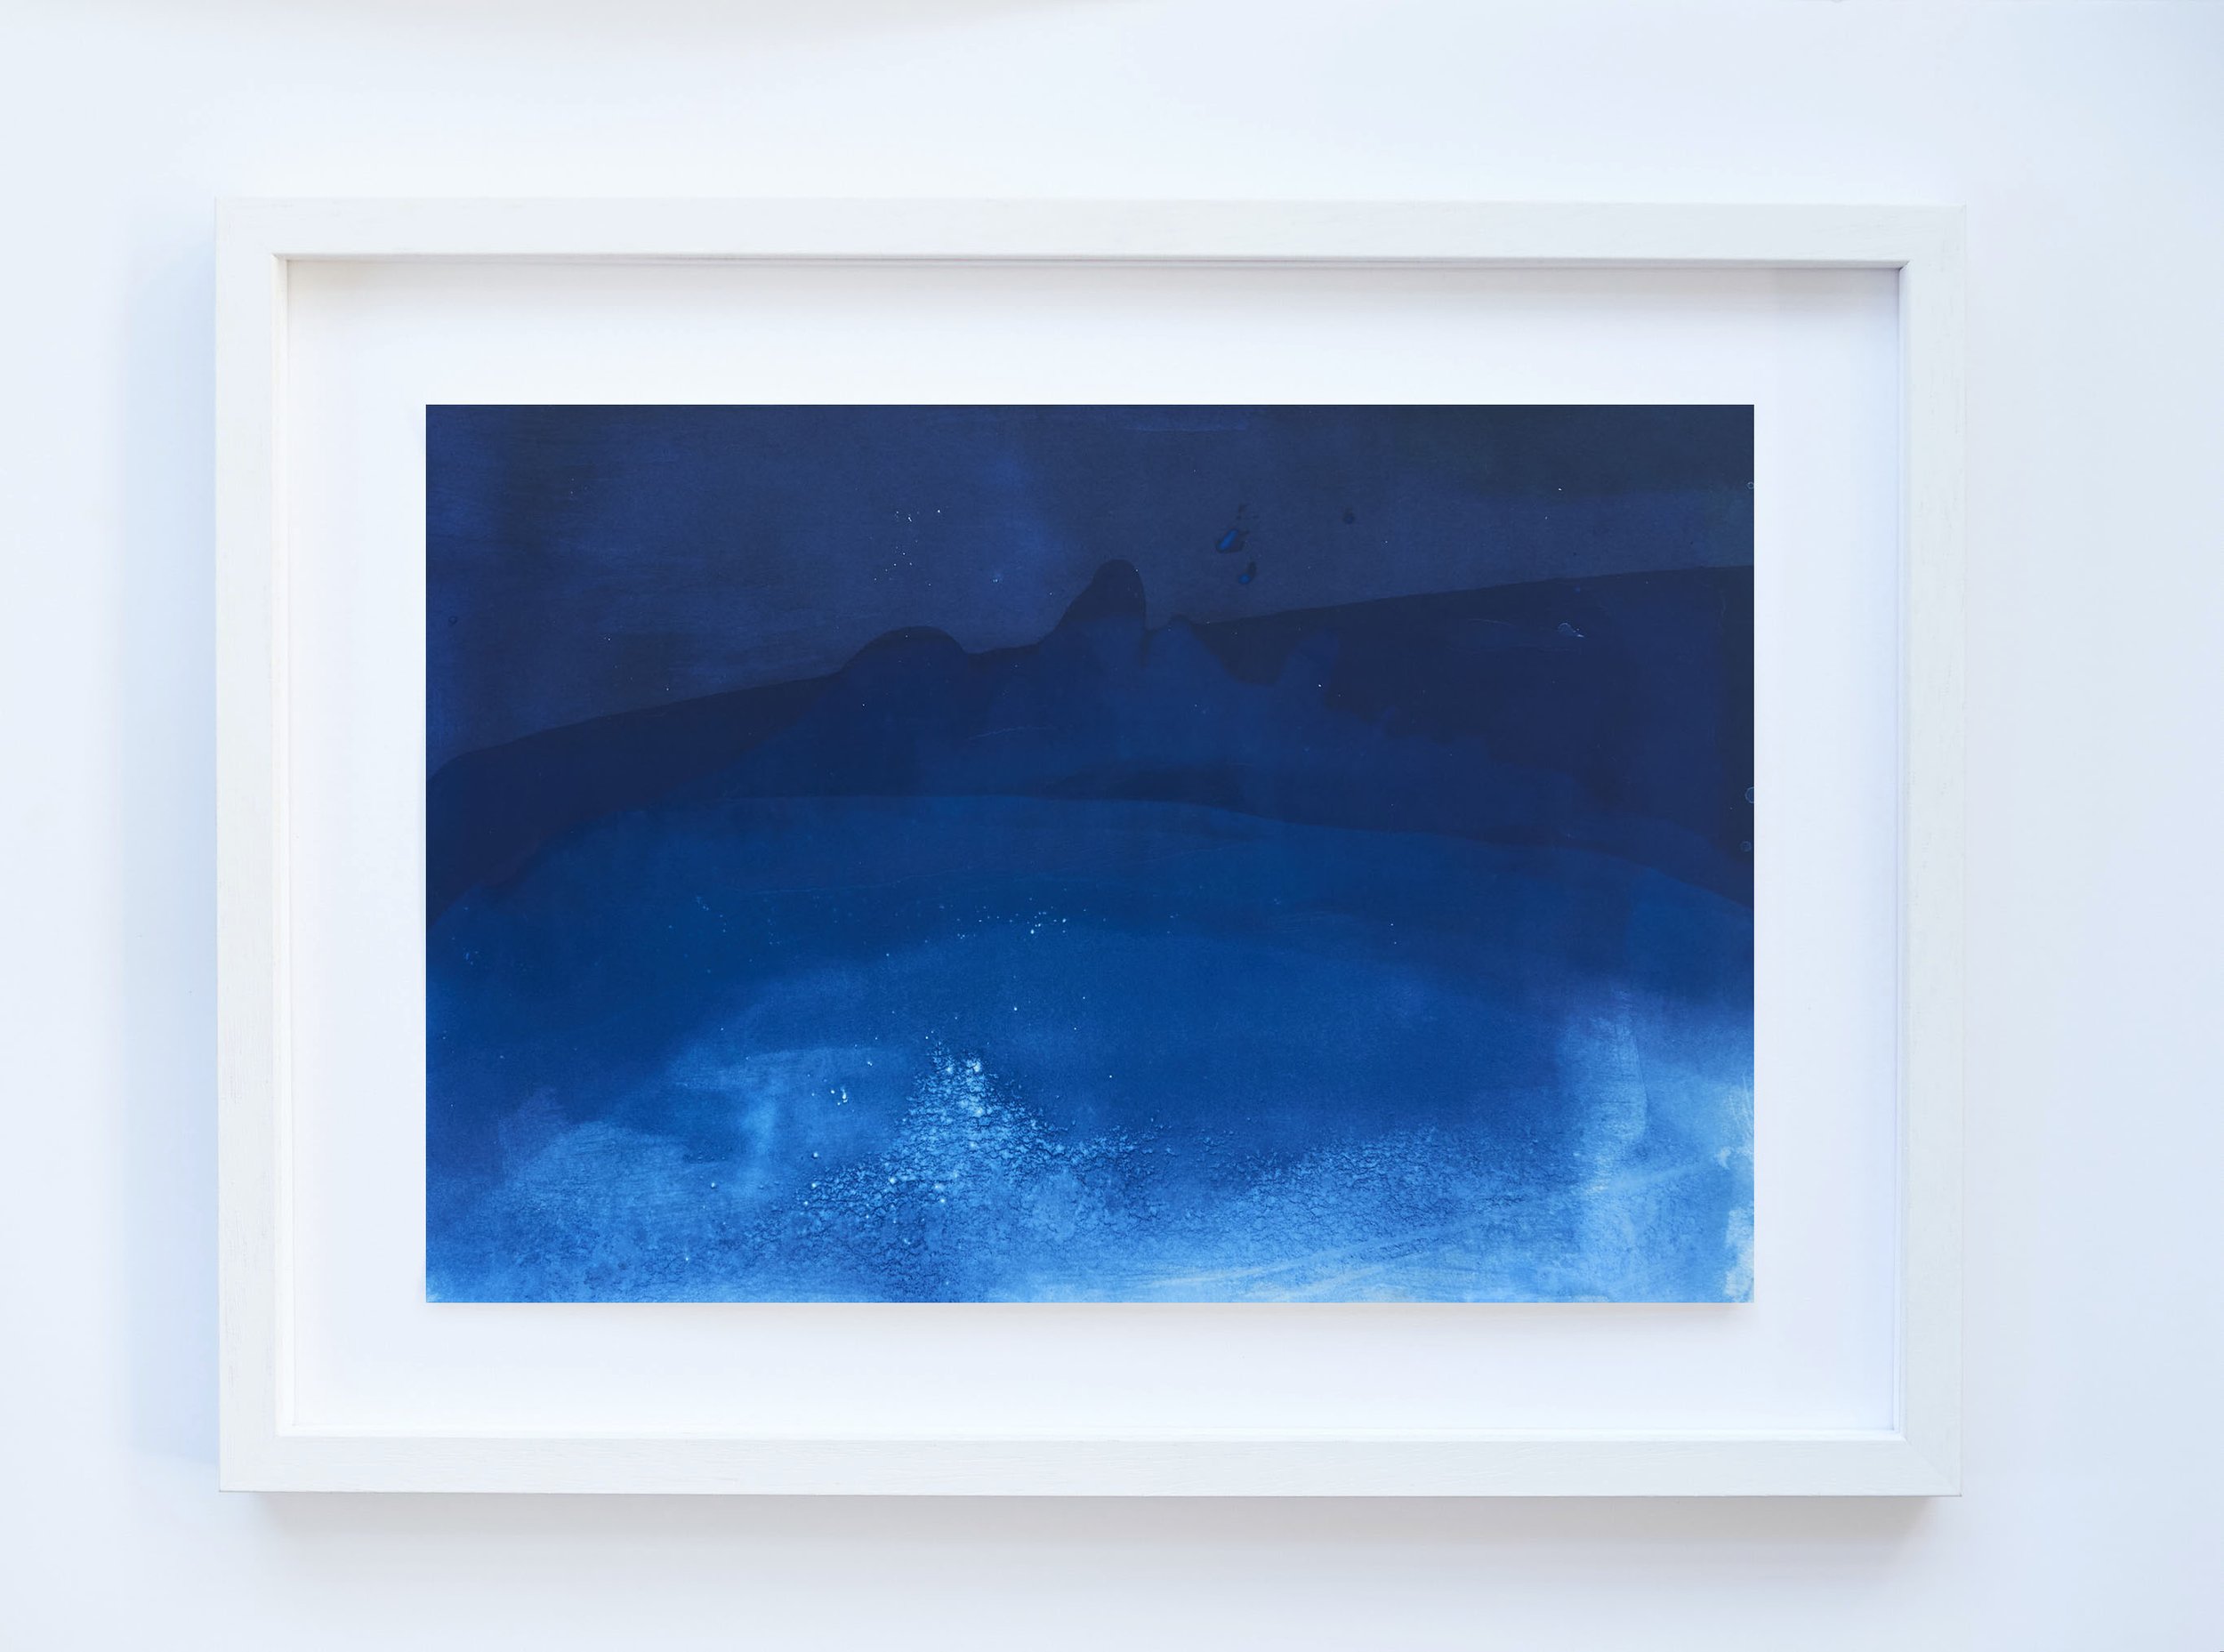  IL-Mainporth-2020-010 Cyanotype on paper  Print 12x18in  Framed 17x23in 